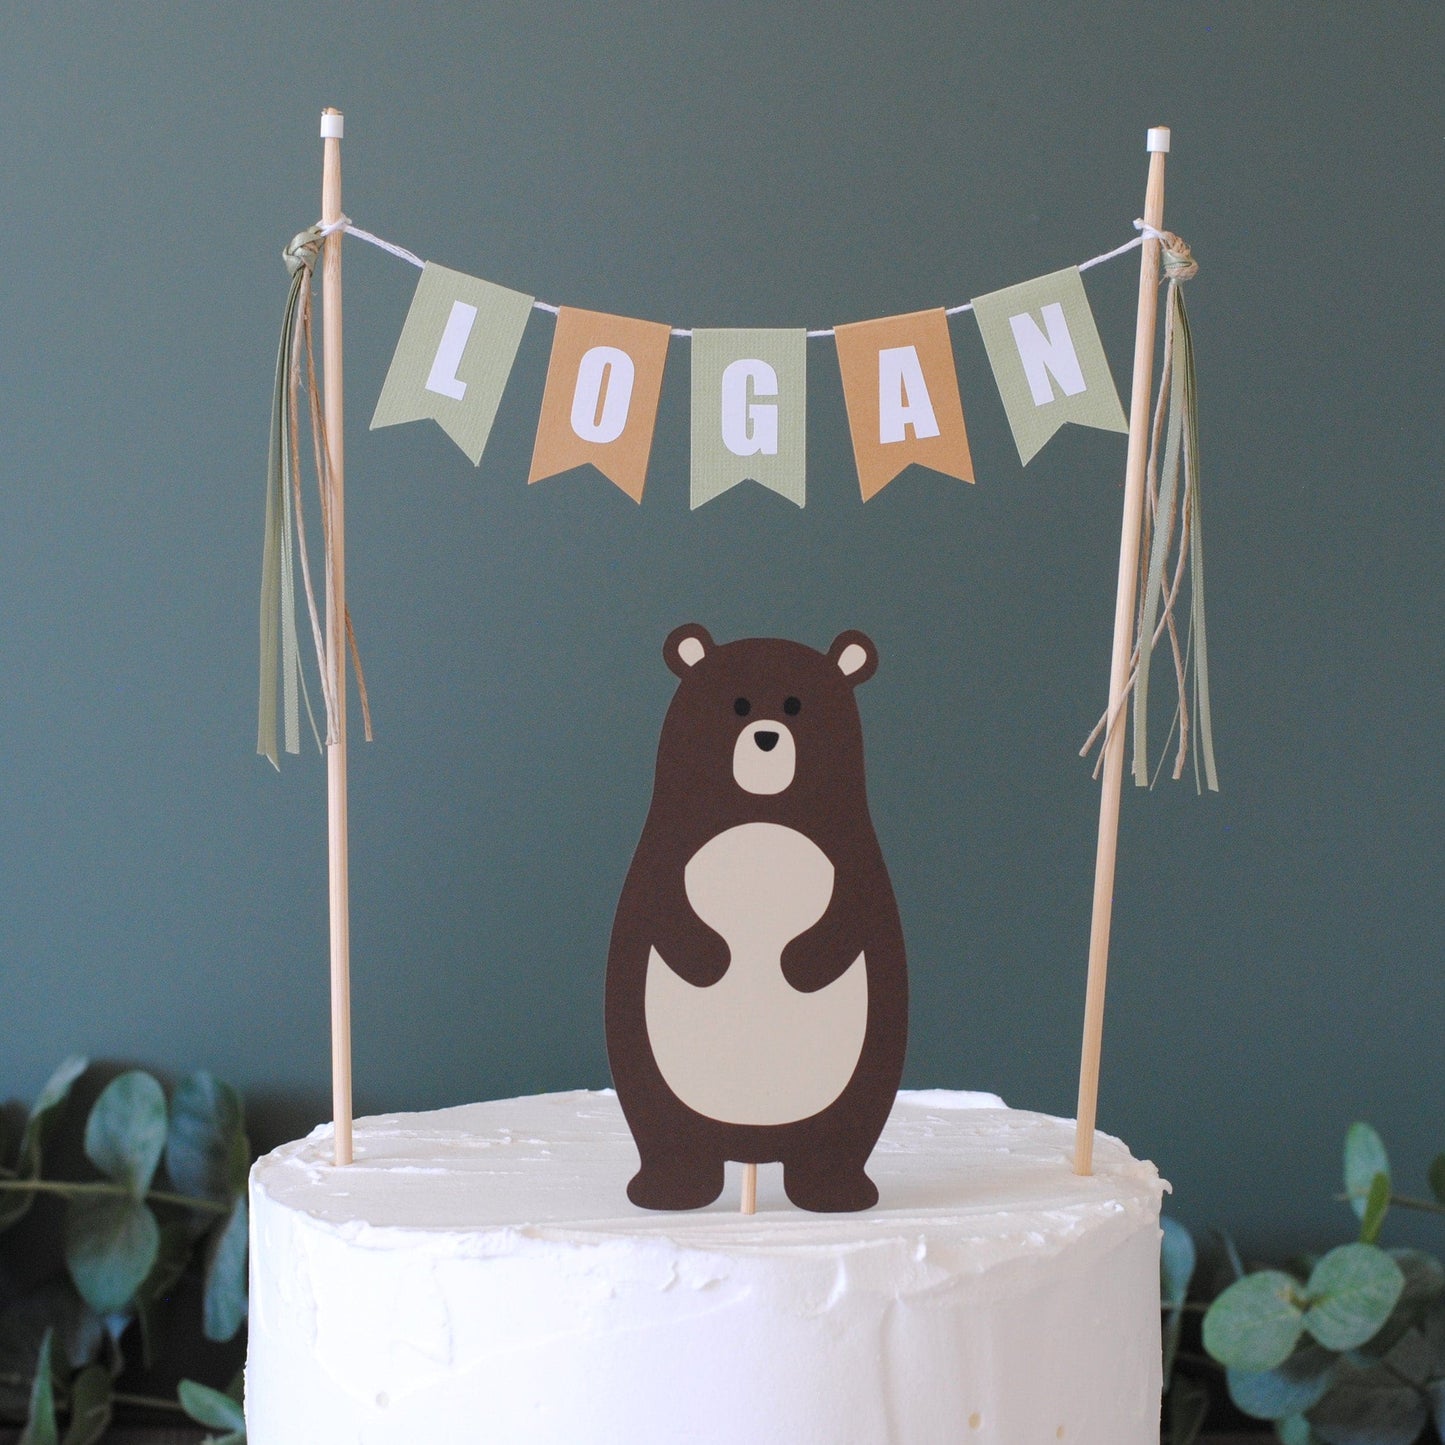 
                  
                    bear themed birthday cake topper for kids birthday cake with matching name banner | personalized cake toppers by Avalon Sunshine
                  
                